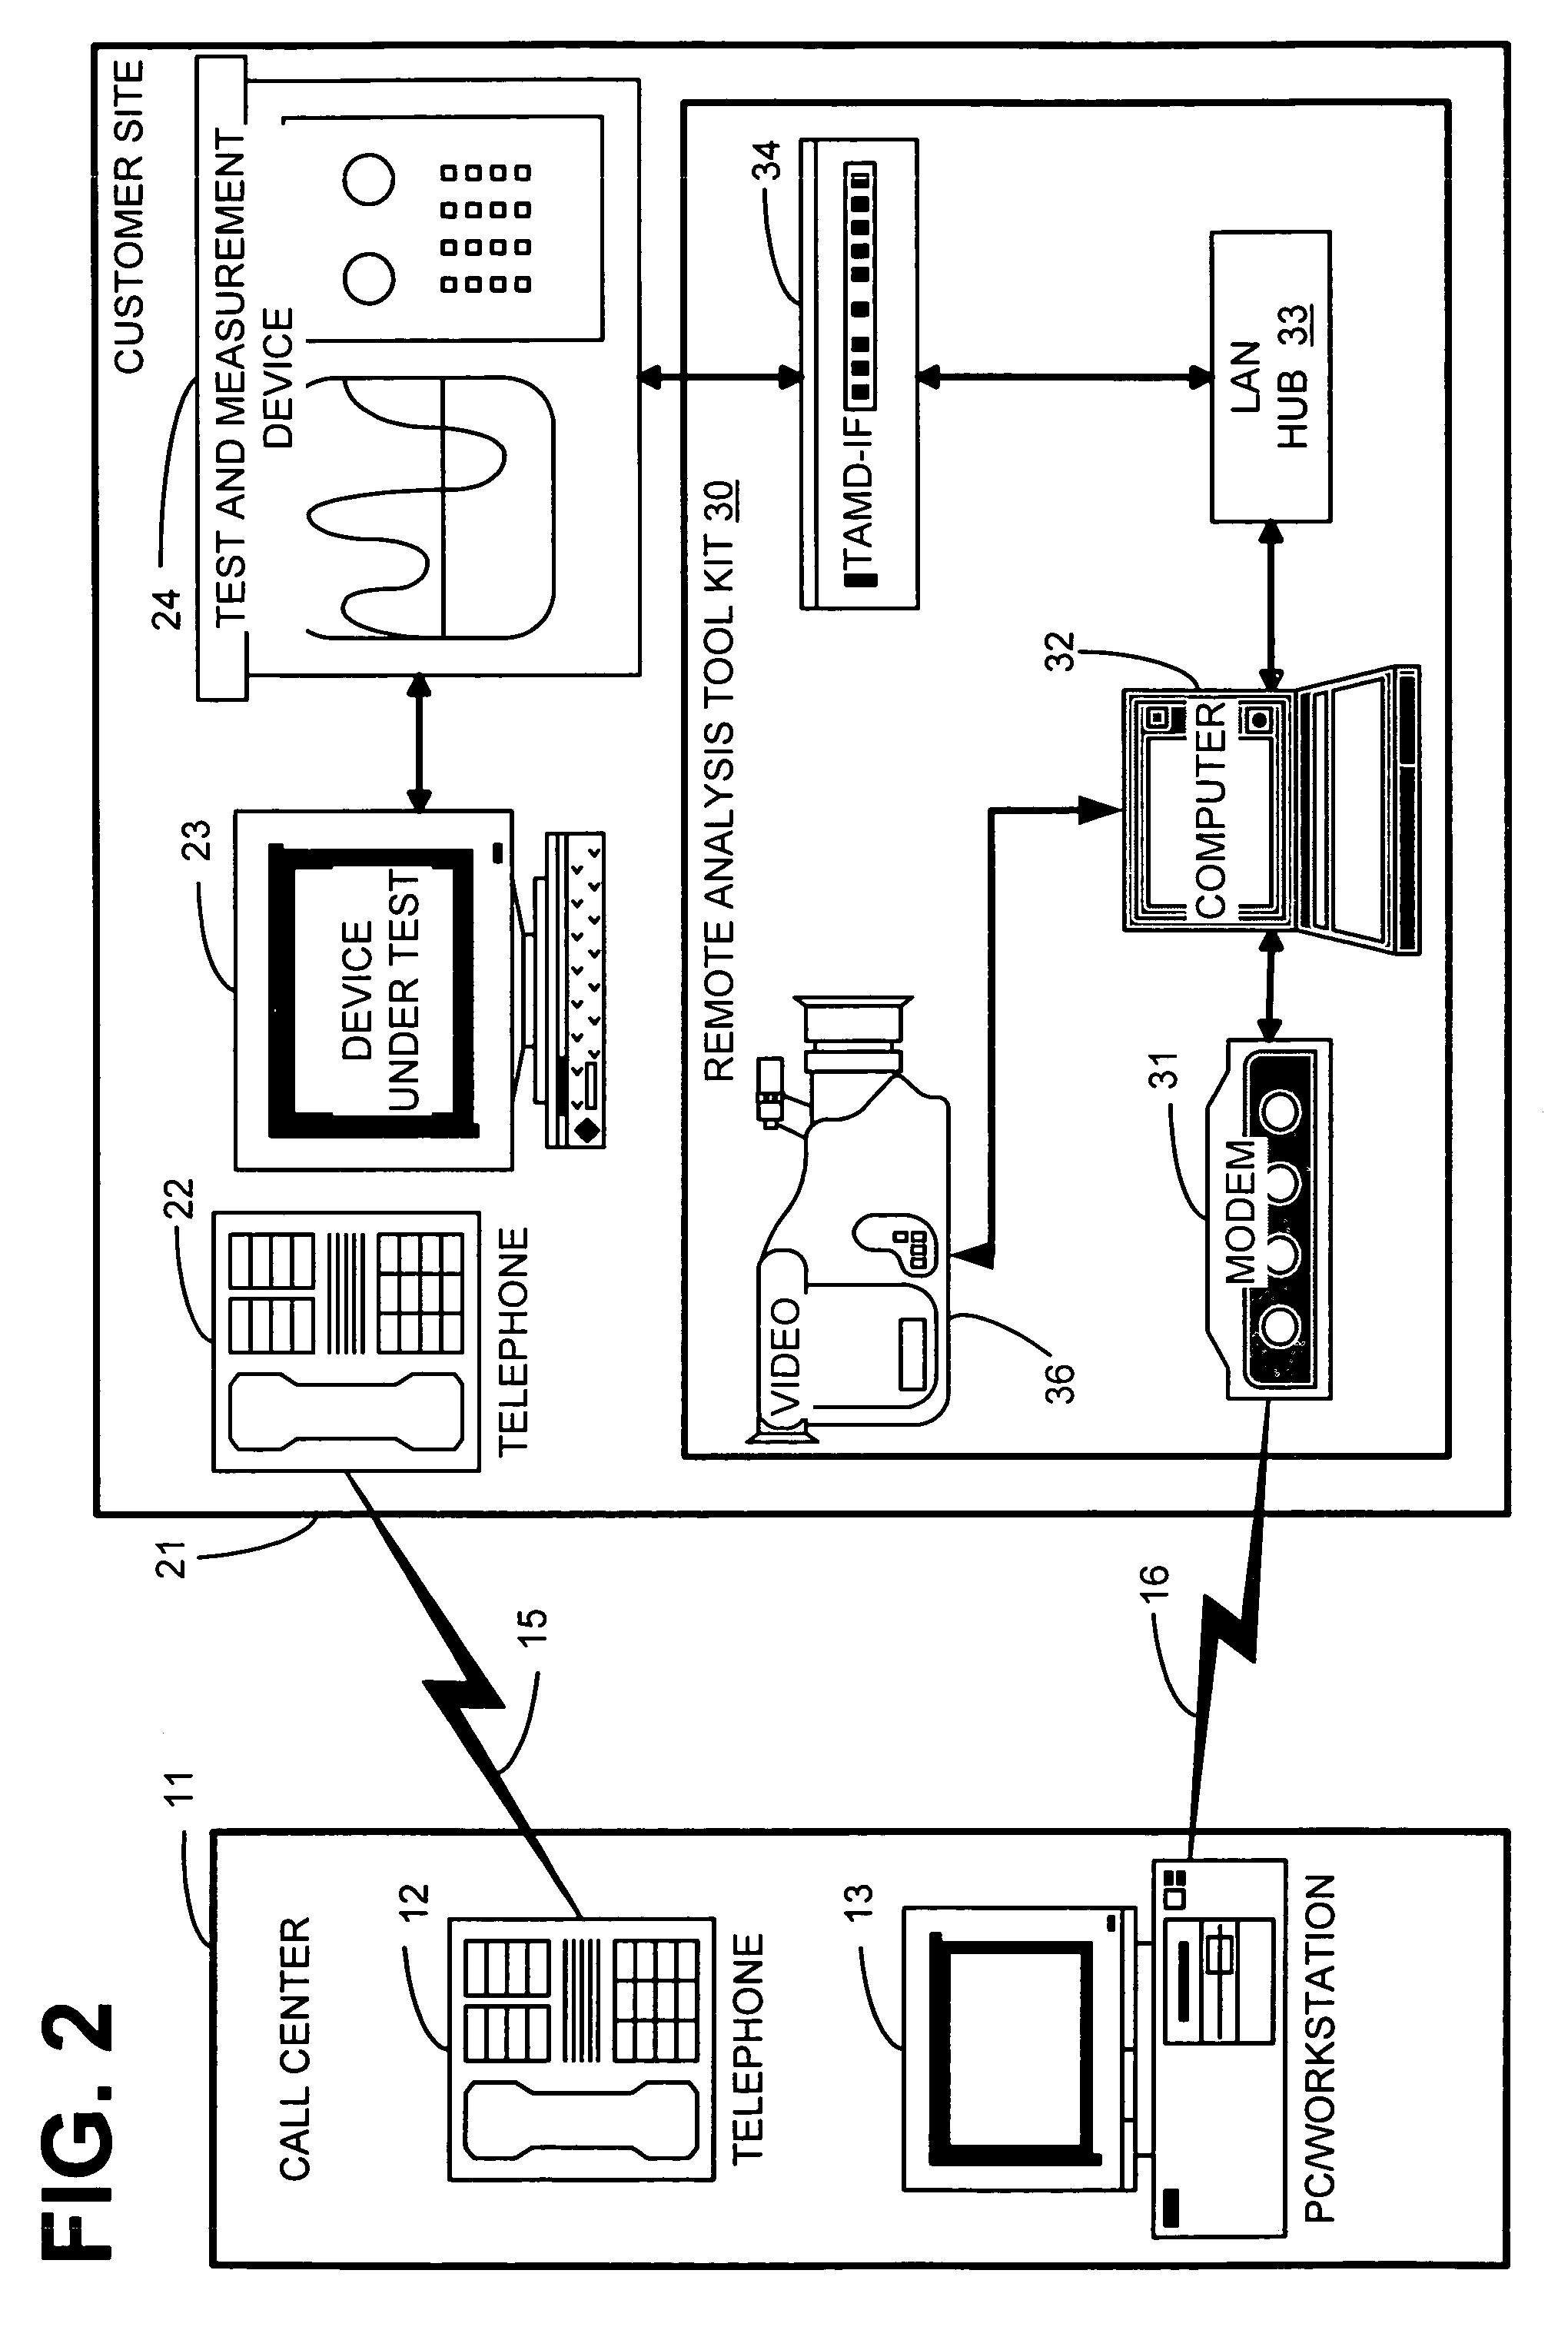 System and method for remote analysis and control of test and measurement devices